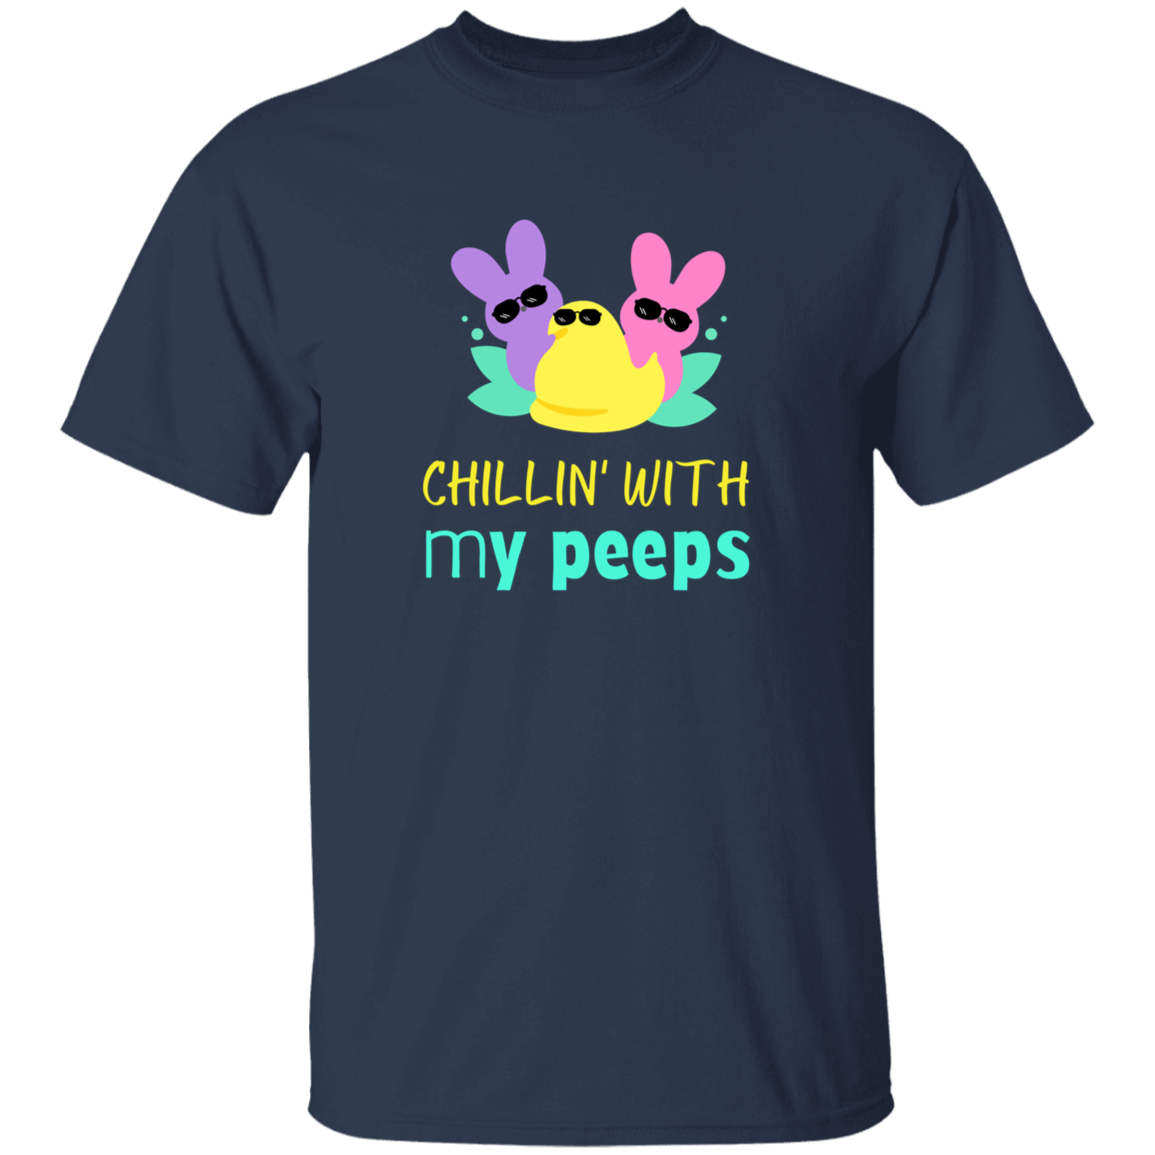 Chillin' with my Peeps Youth 5.3 oz 100% Cotton T-Shirt